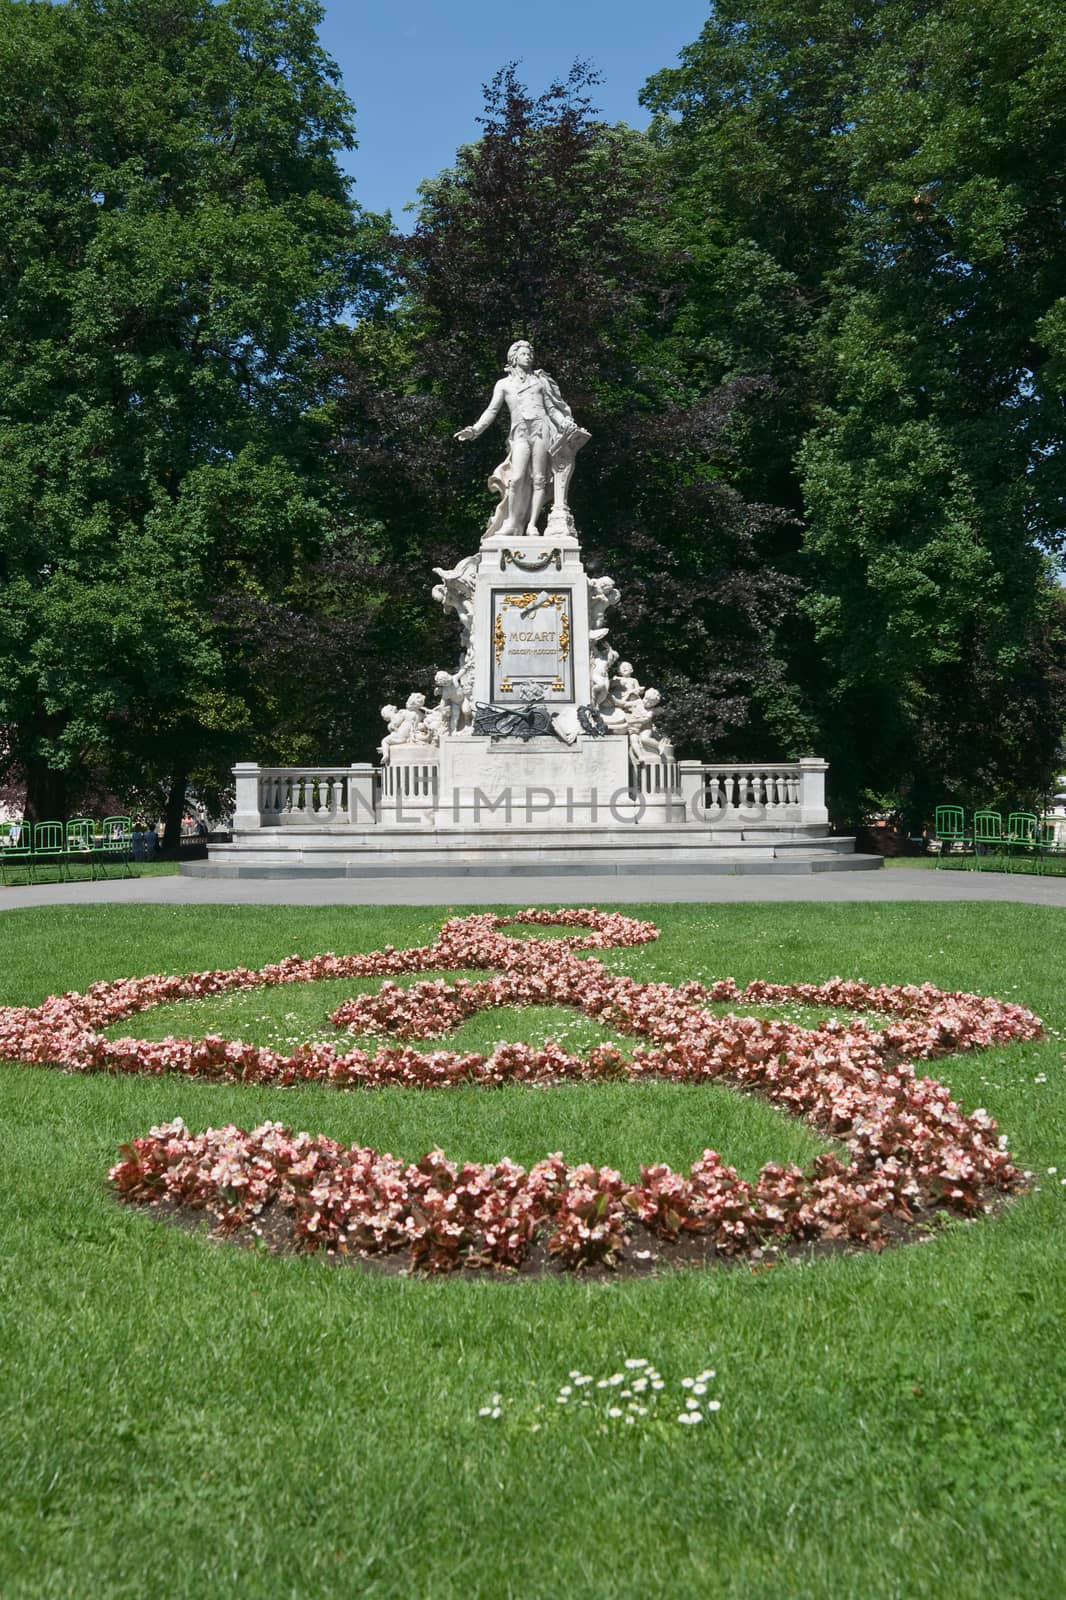 Monument to Wolfgang Amadeus Mozart in Burggarten garden, Vienna, Austria. Memorial was created by sculptor Viktor Tilgner in 1896 and now is in public domain.